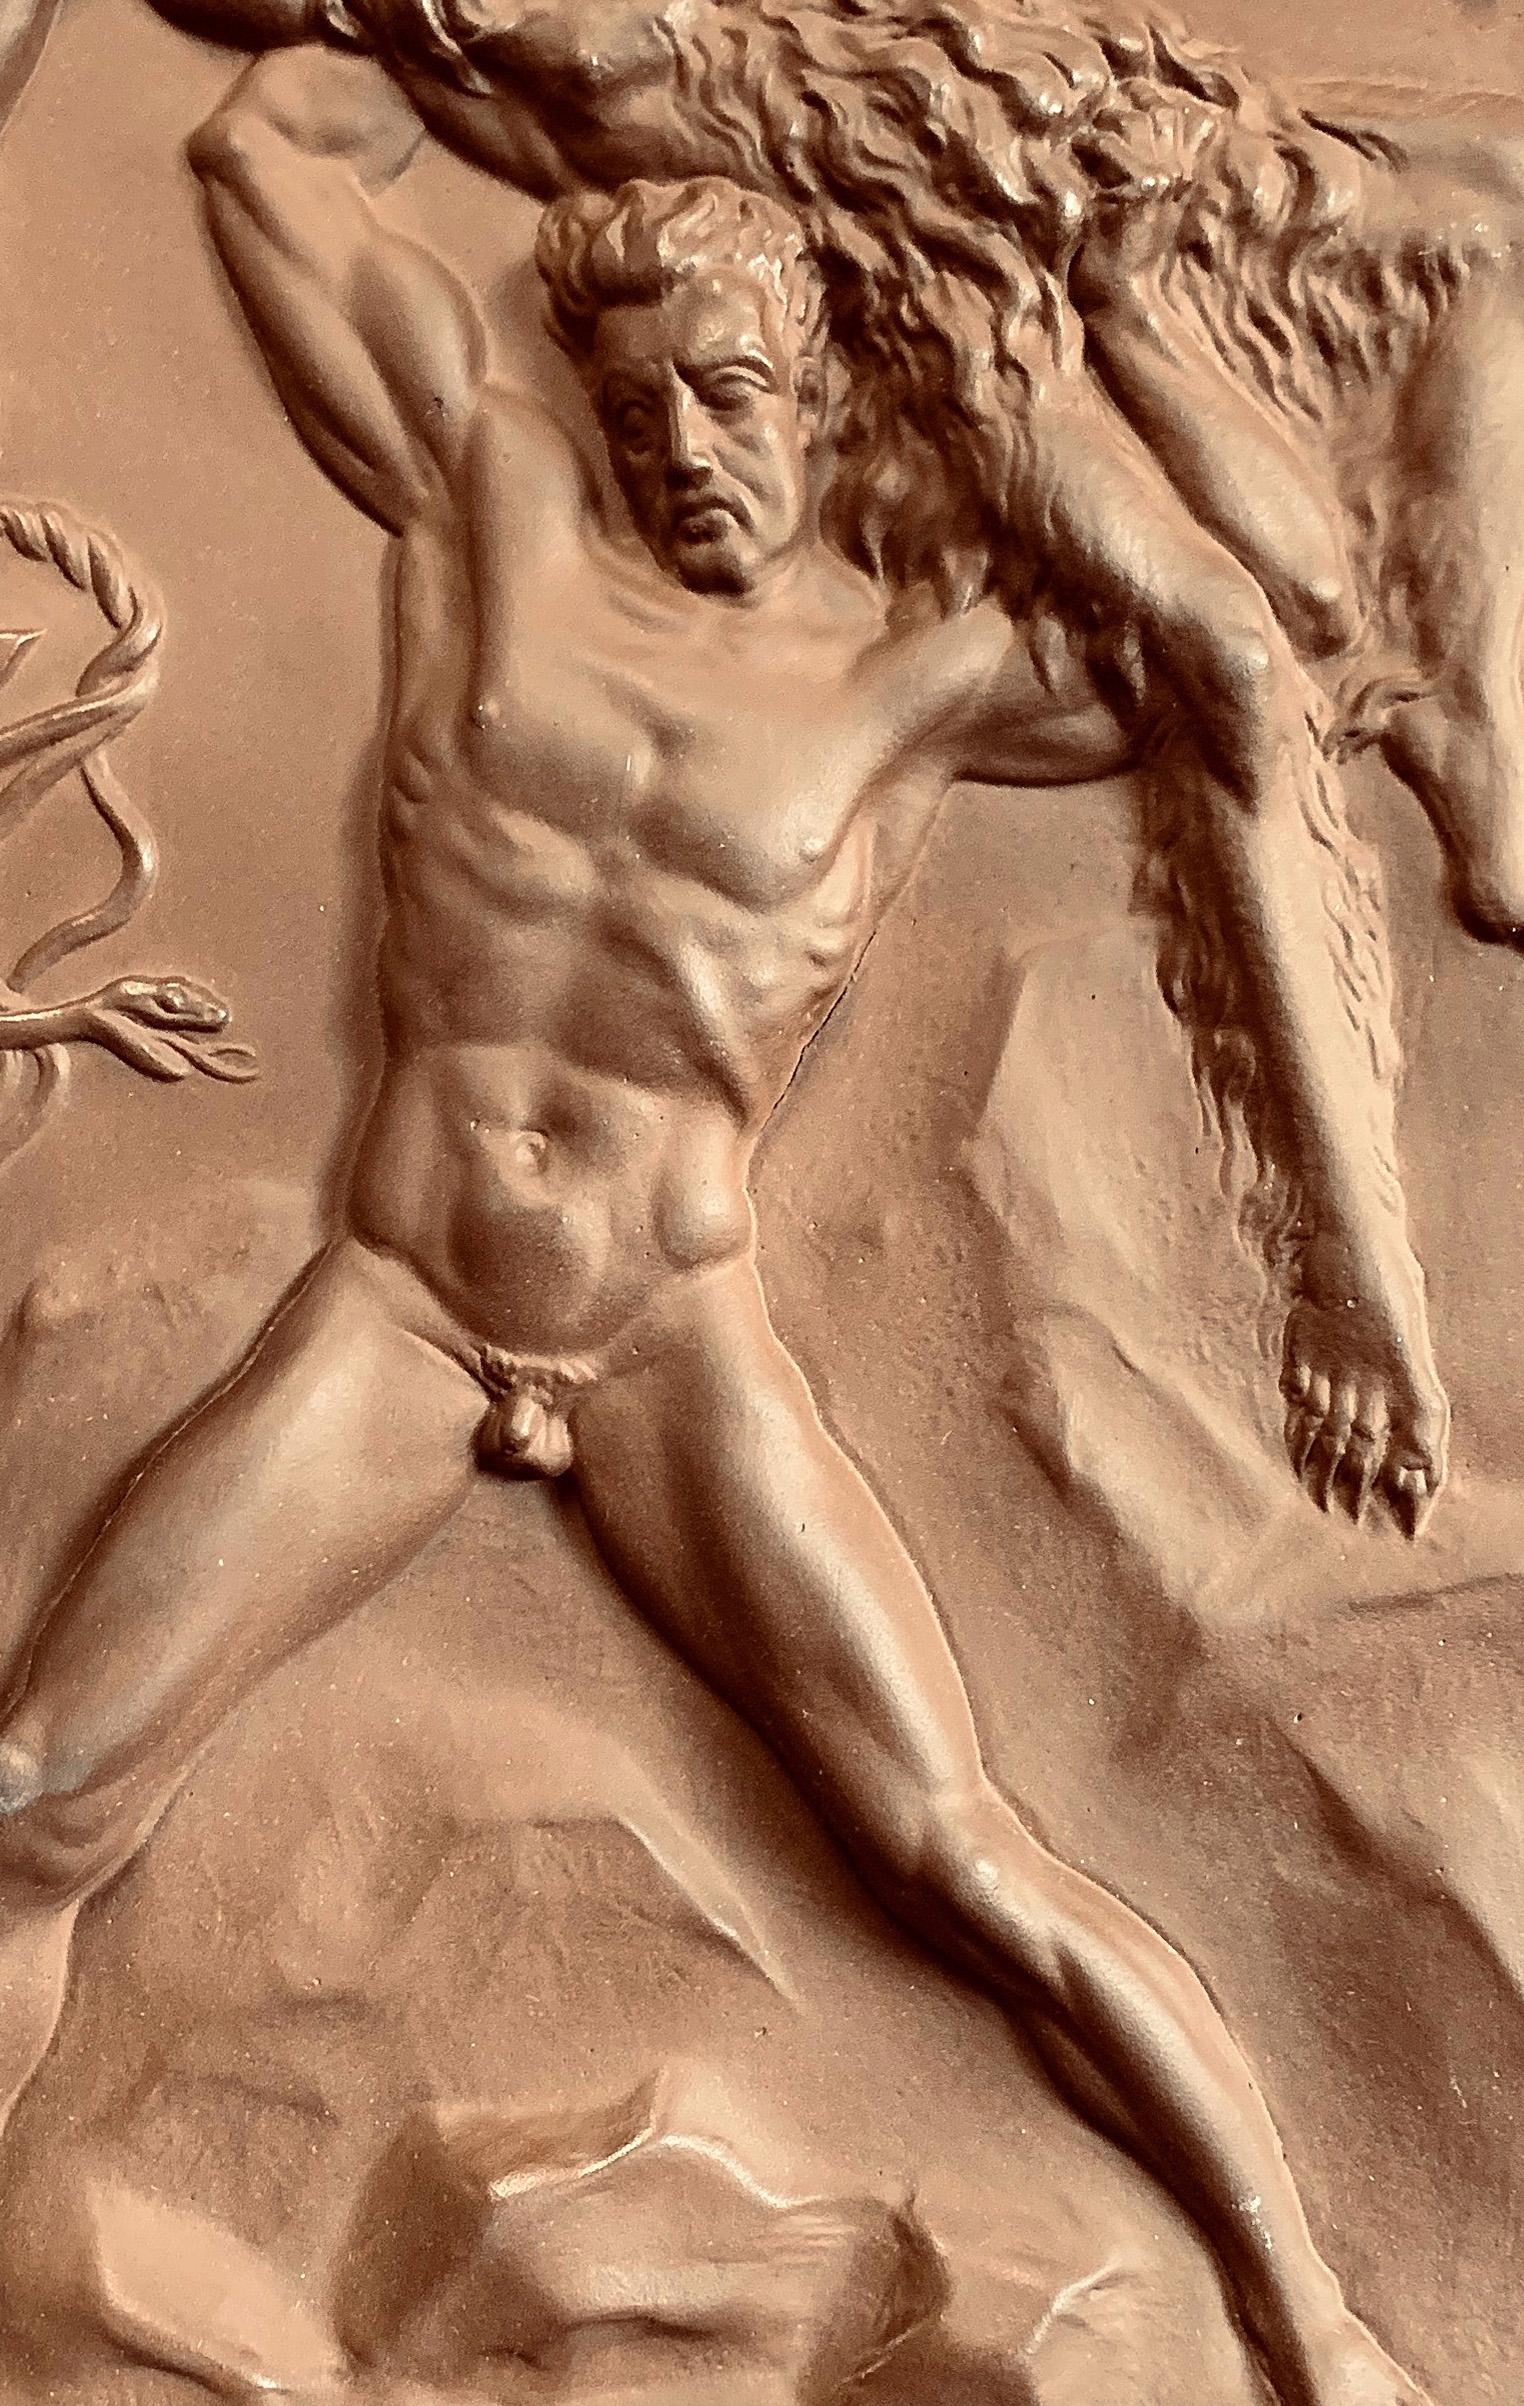 Rare and fascinating, this allegorical plaque depicts a nude, strong Germany triumphing over a bearded savage, representing the Soviet Union, who is holding -- of course -- a Hammer in one hand and a sickle in the other. The Soviet's Hammer is also